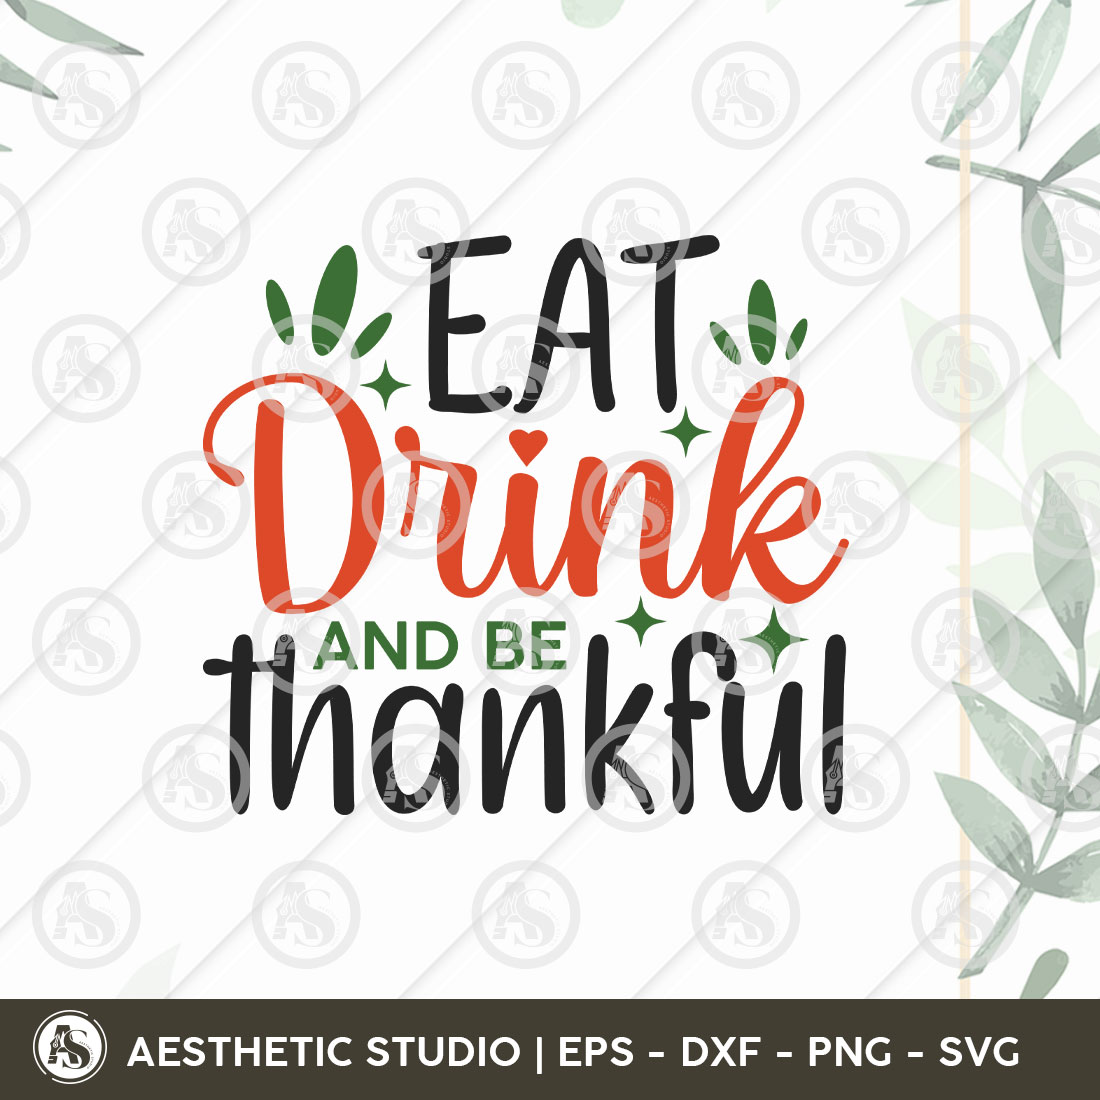 Eat Drink And Thankful Svg, Thanksgiving Day Svg T-shirt Design, Thankful Svg, Pumpkin svg, Turkey svg, Gobble Svg, Pumpkin Spice, Fall Leaves Svg, Fall Vibes Svg, Cut Files cover image.